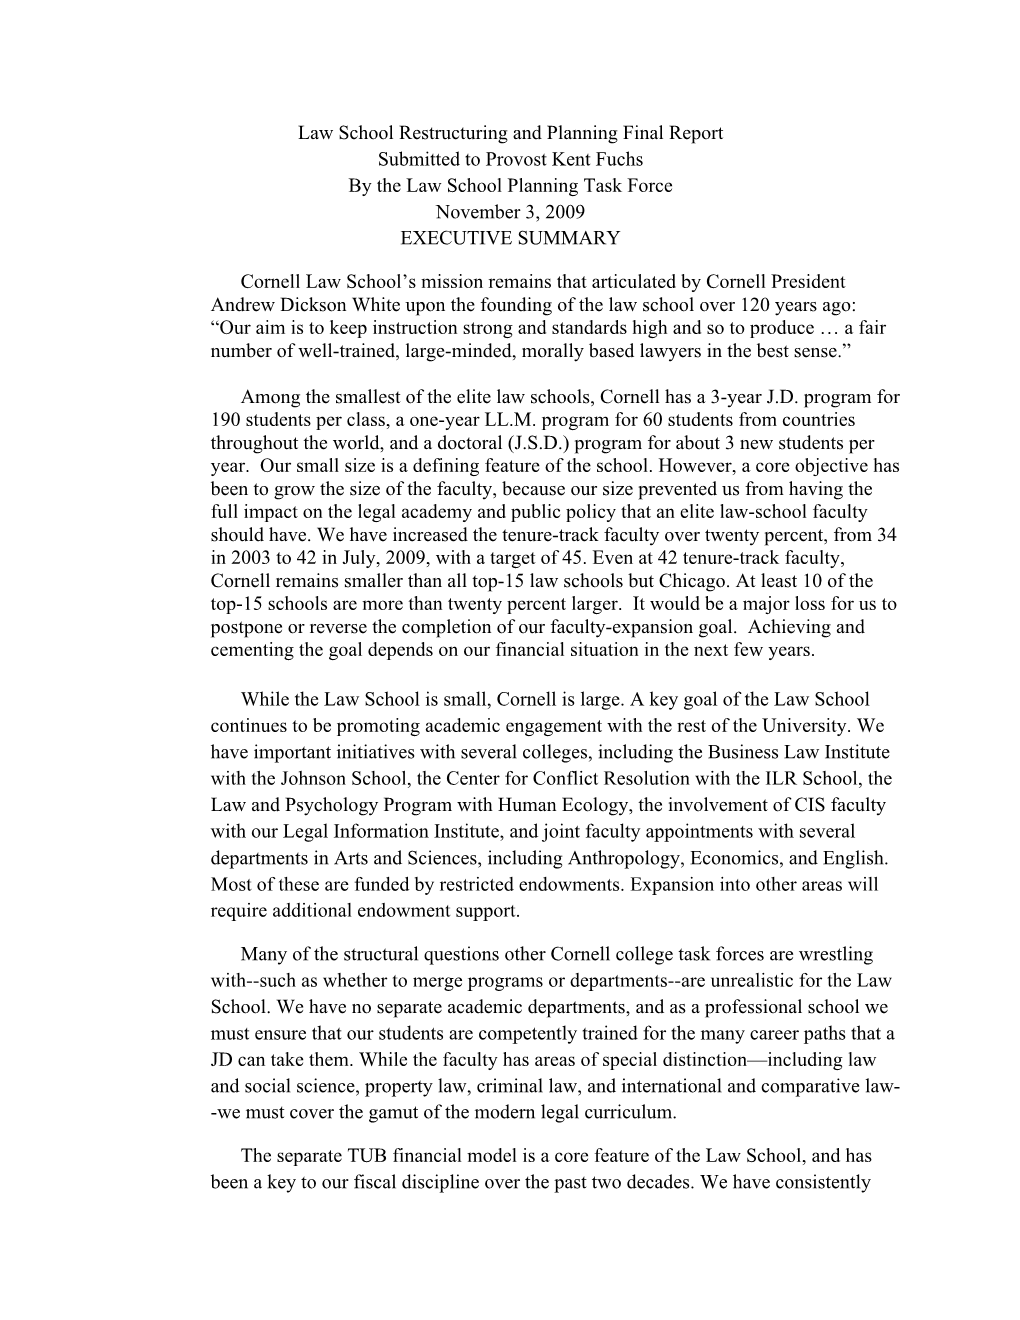 Law School Restructuring and Planning Final Report Submitted to Provost Kent Fuchs by the Law School Planning Task Force November 3, 2009 EXECUTIVE SUMMARY